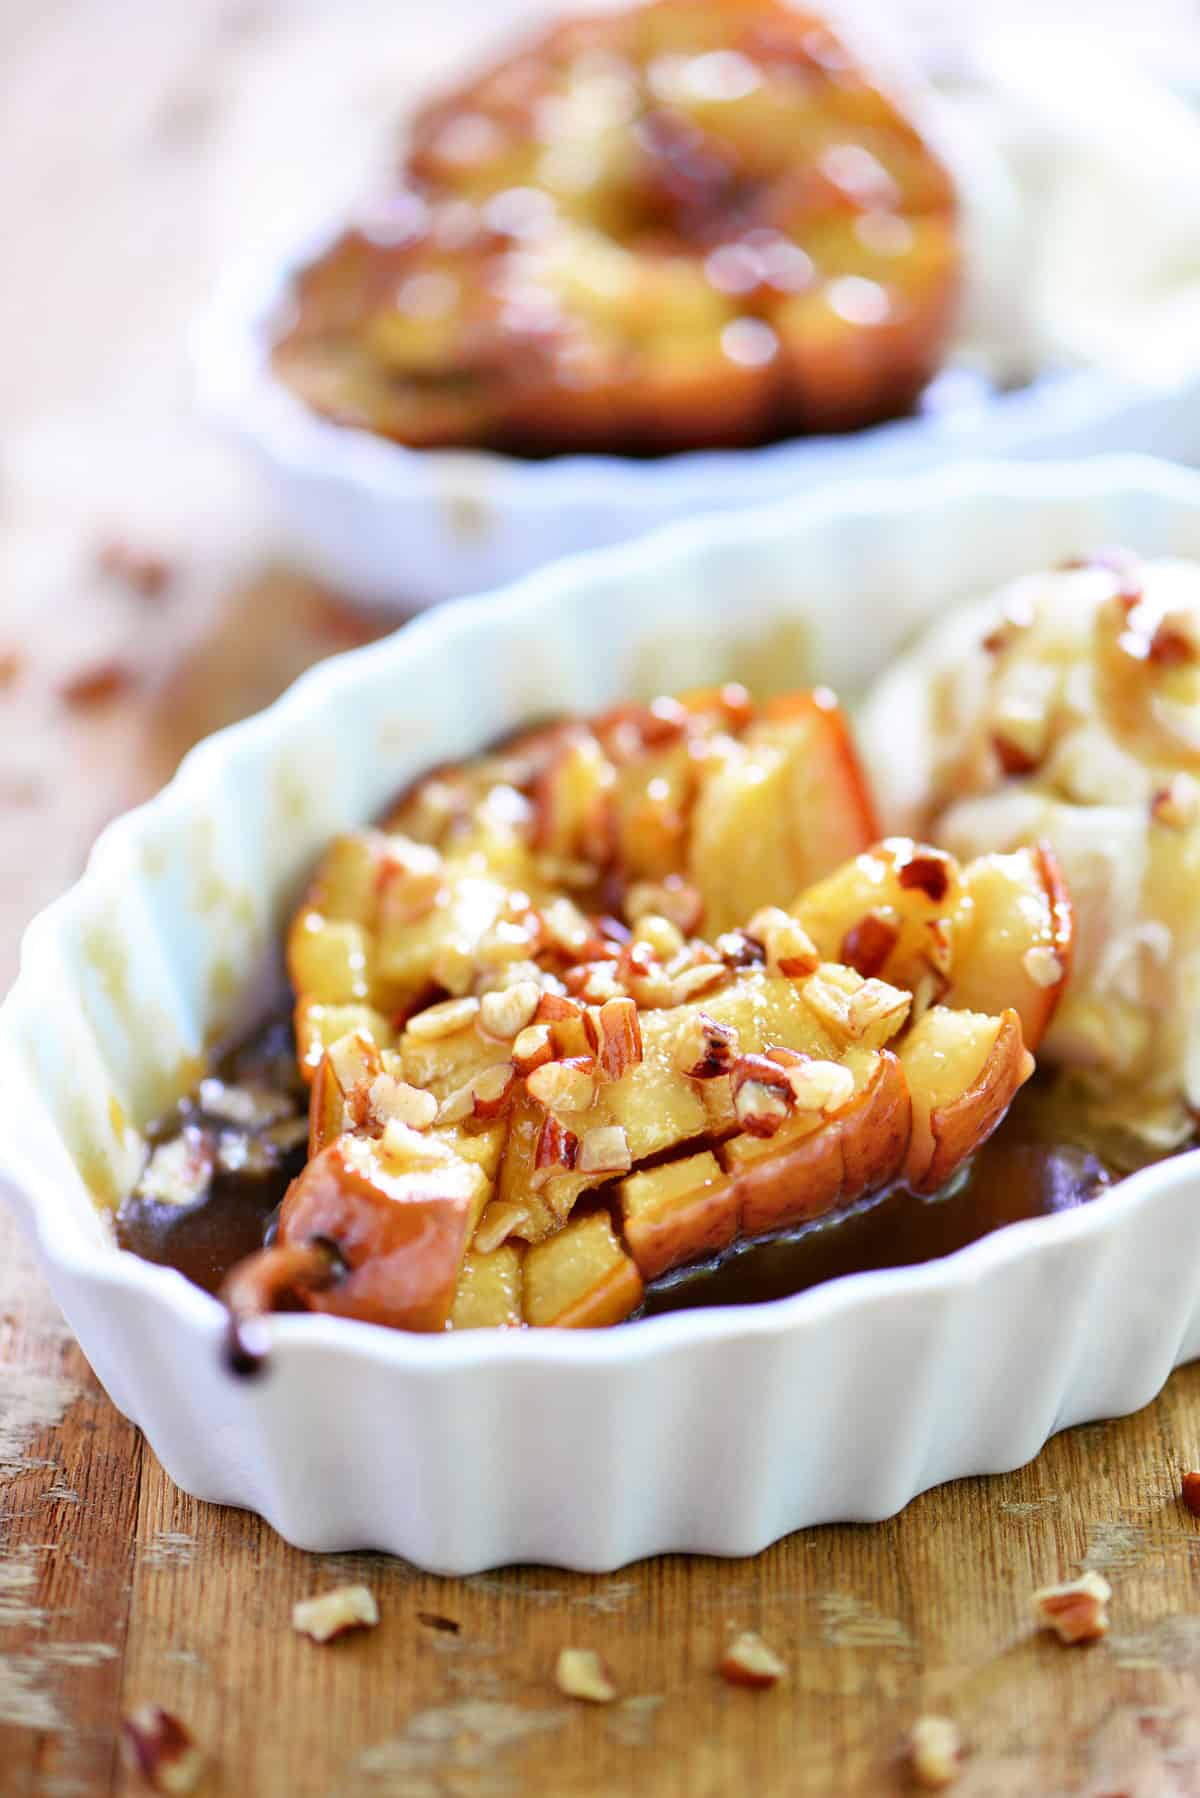 A baked pear in a bowl with nuts and caramel.